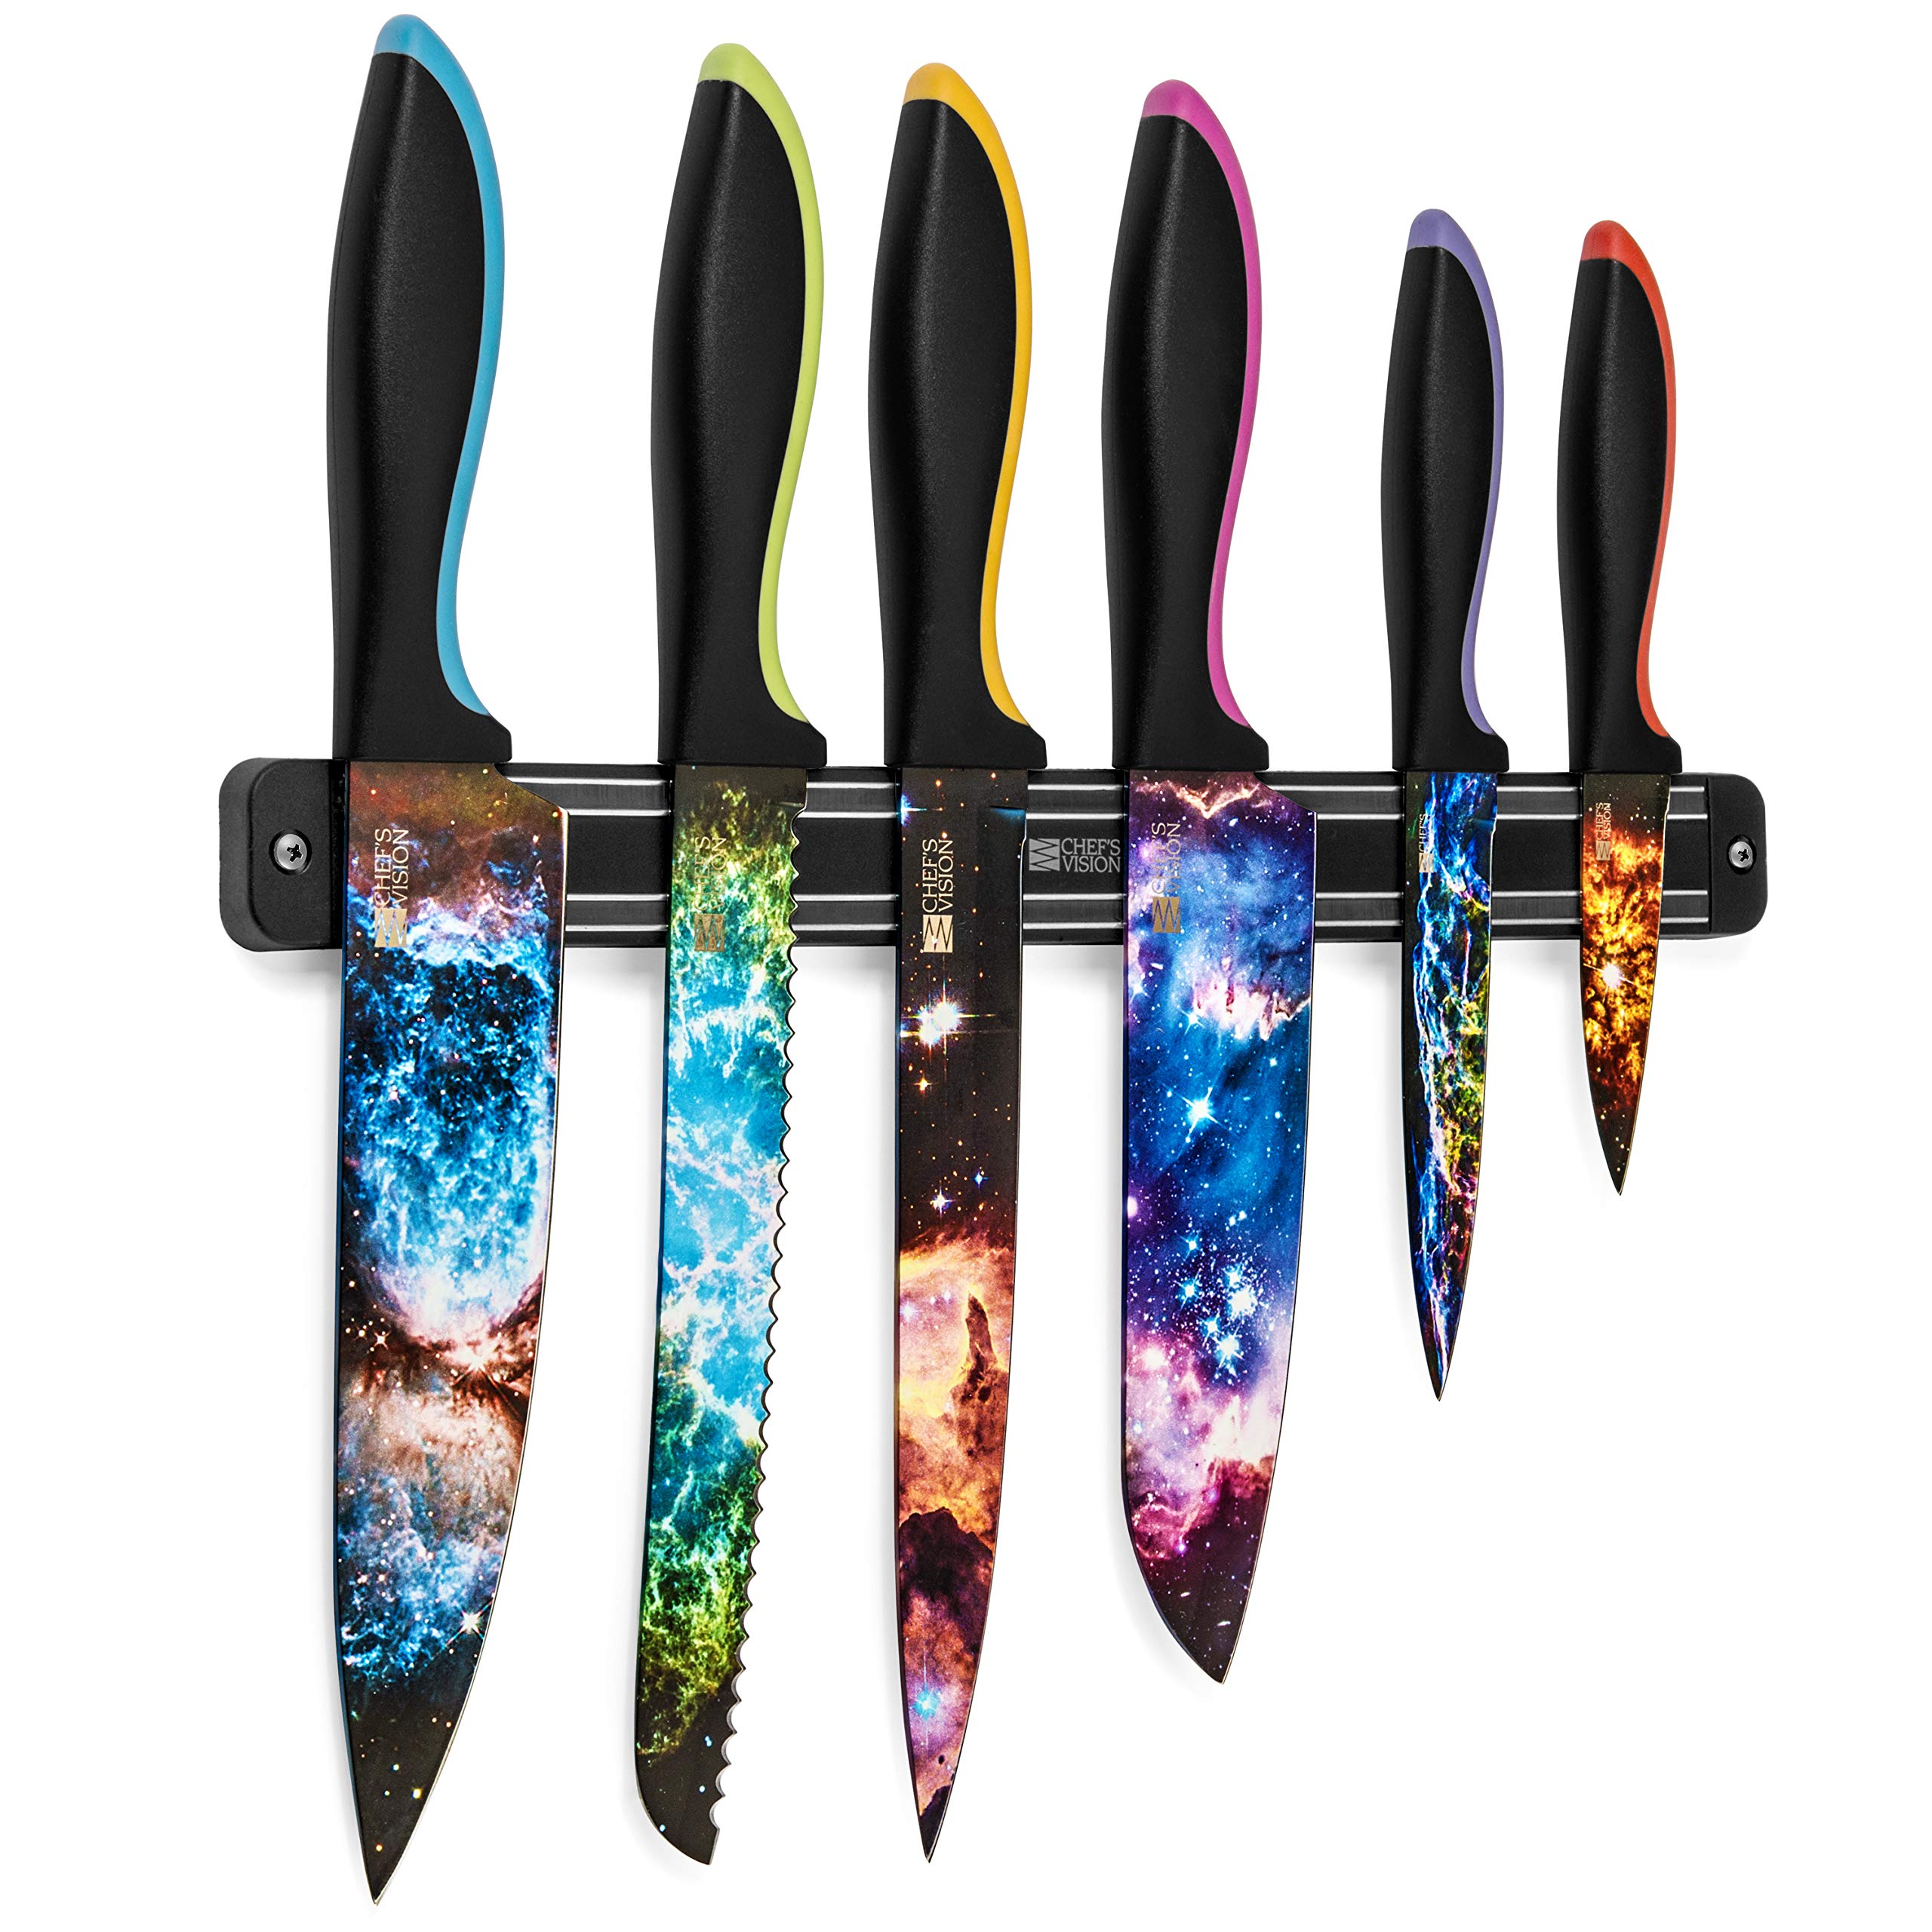 CHEF'S VISION Cosmos Knife Set Bundled With BEHOLD Wall-Mounted Magnetic Holder Black